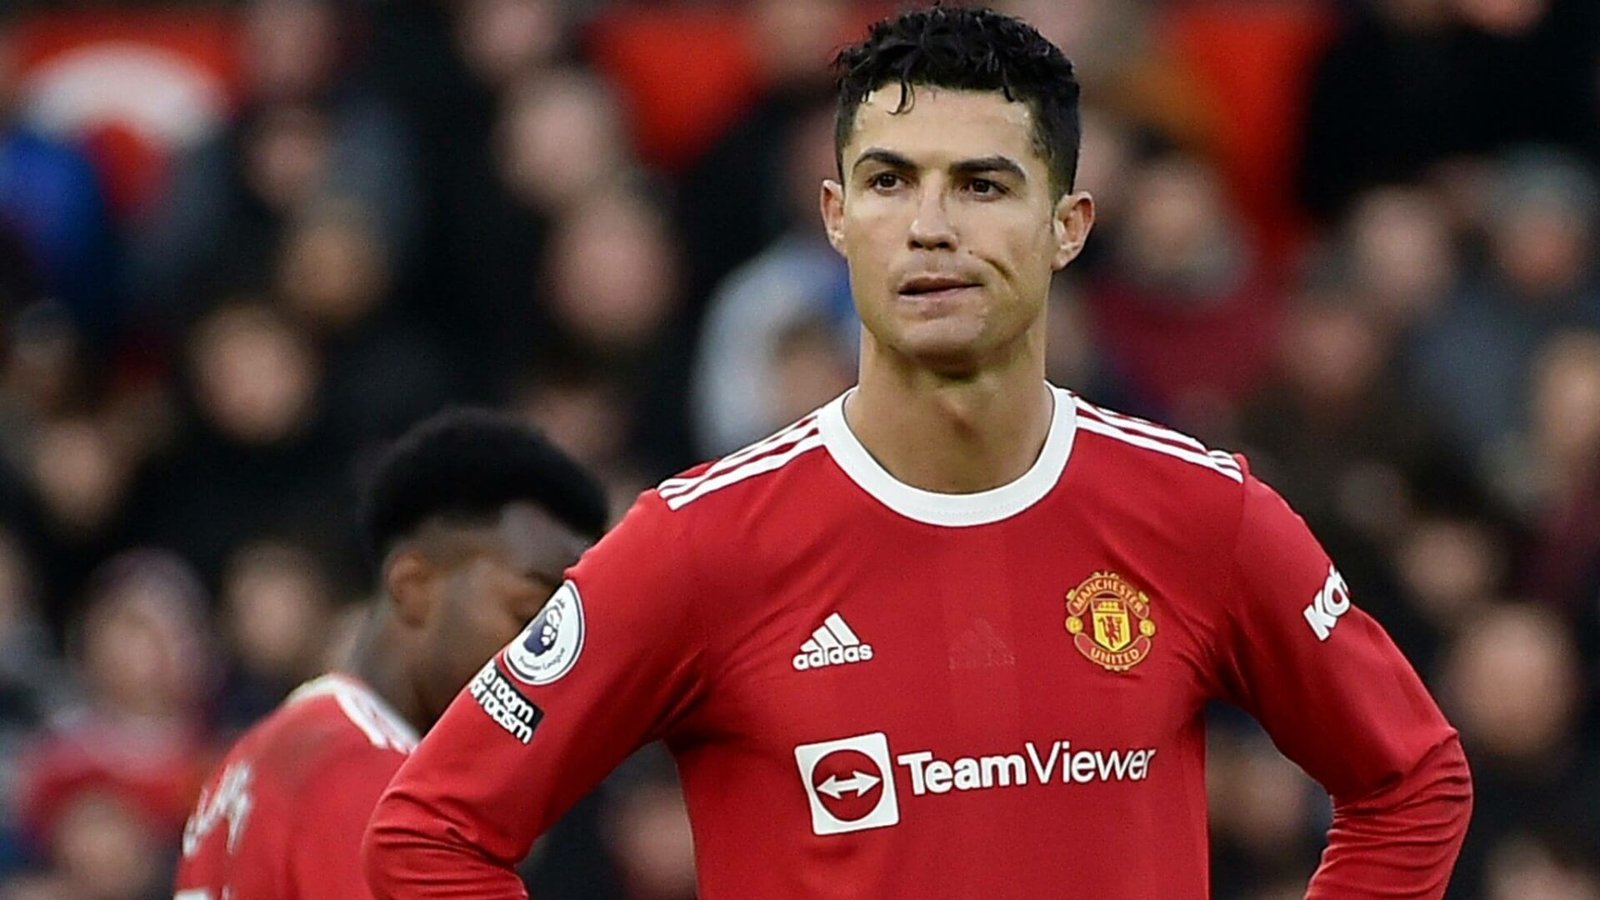 Cristiano Ronaldo is set to face the English Football Association to appeal misconduct charges